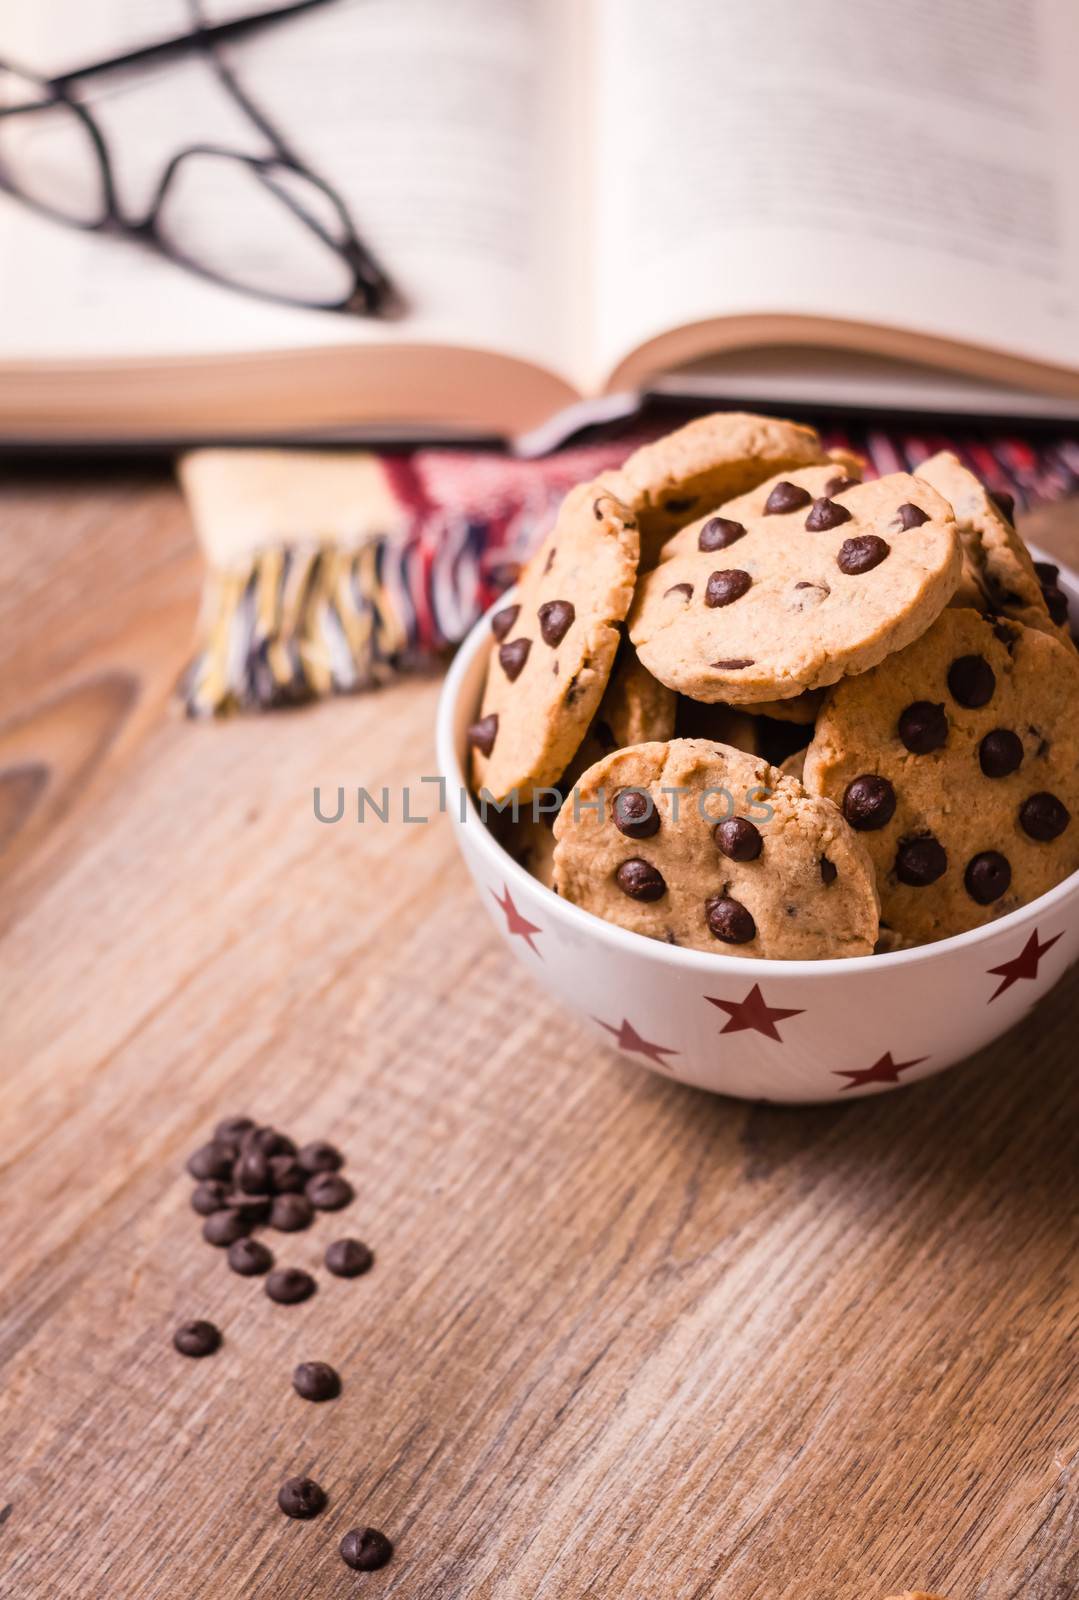 Chocolate chip cookies and book on wood background by doble.d